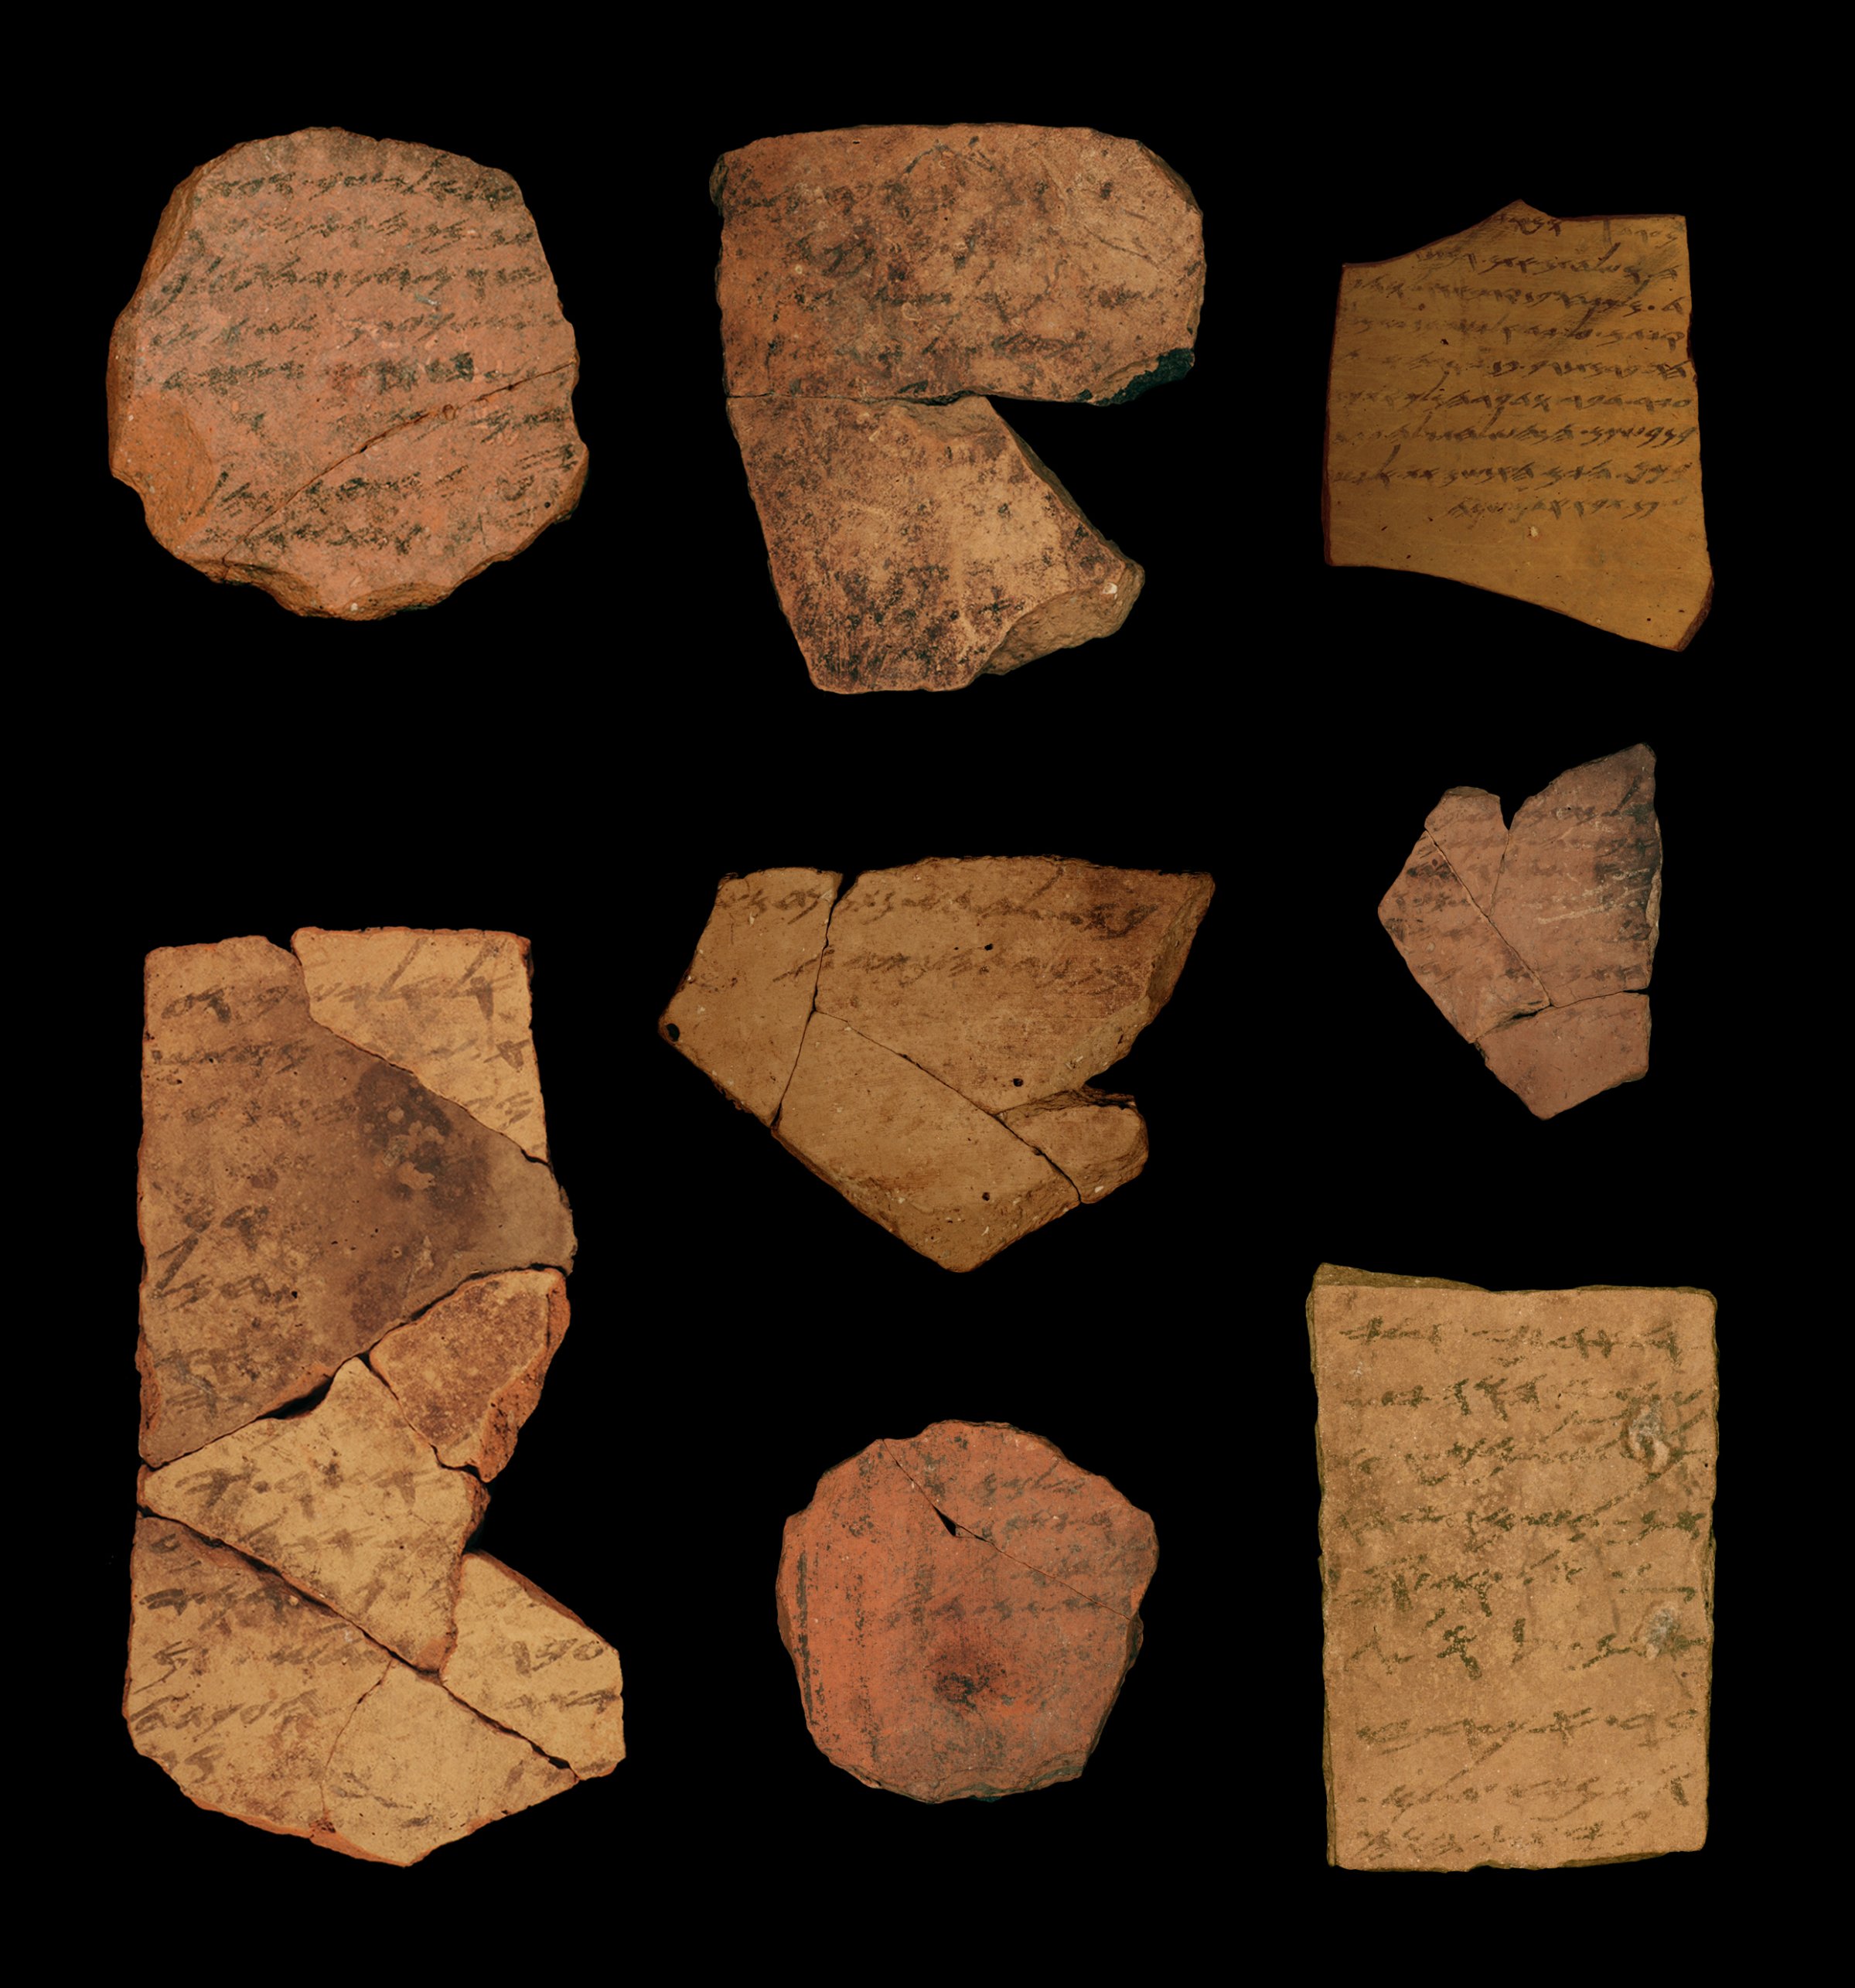 "Pictured are ostraca (ink inscriptions on clay) from the Iron Age fortress of Arad, located in arid southern Judah. These documents are dated to the latest phase of the First Temple Period in Judah, ca. 600 BCE. The texts represent correspondence of local military personnel. The research engaged new document analysis algorithms aimed at identifying different writers. It detected at least six contemporaneous authors within a corpus of 16 inscriptions. This indicates a high literacy level within the Judahite administration and provides a possible stage-setting for compilation of biblical texts.